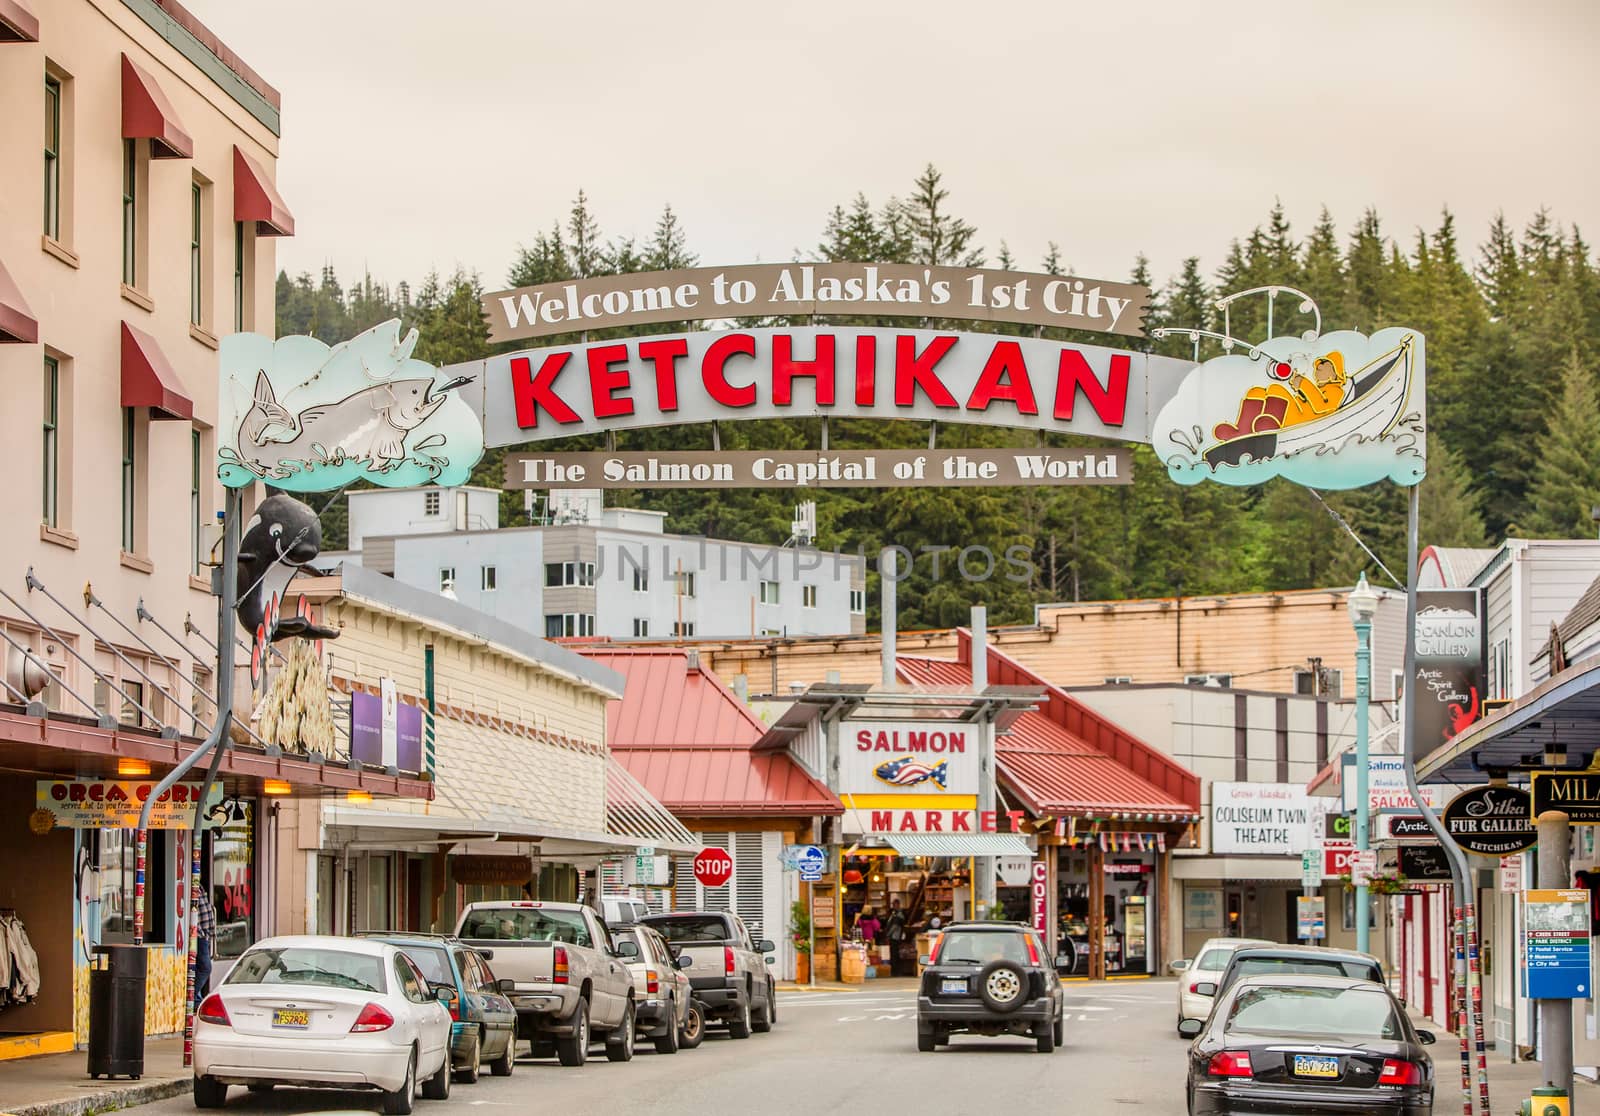 Early in the Tourist Season in Ketchikan by Creatista